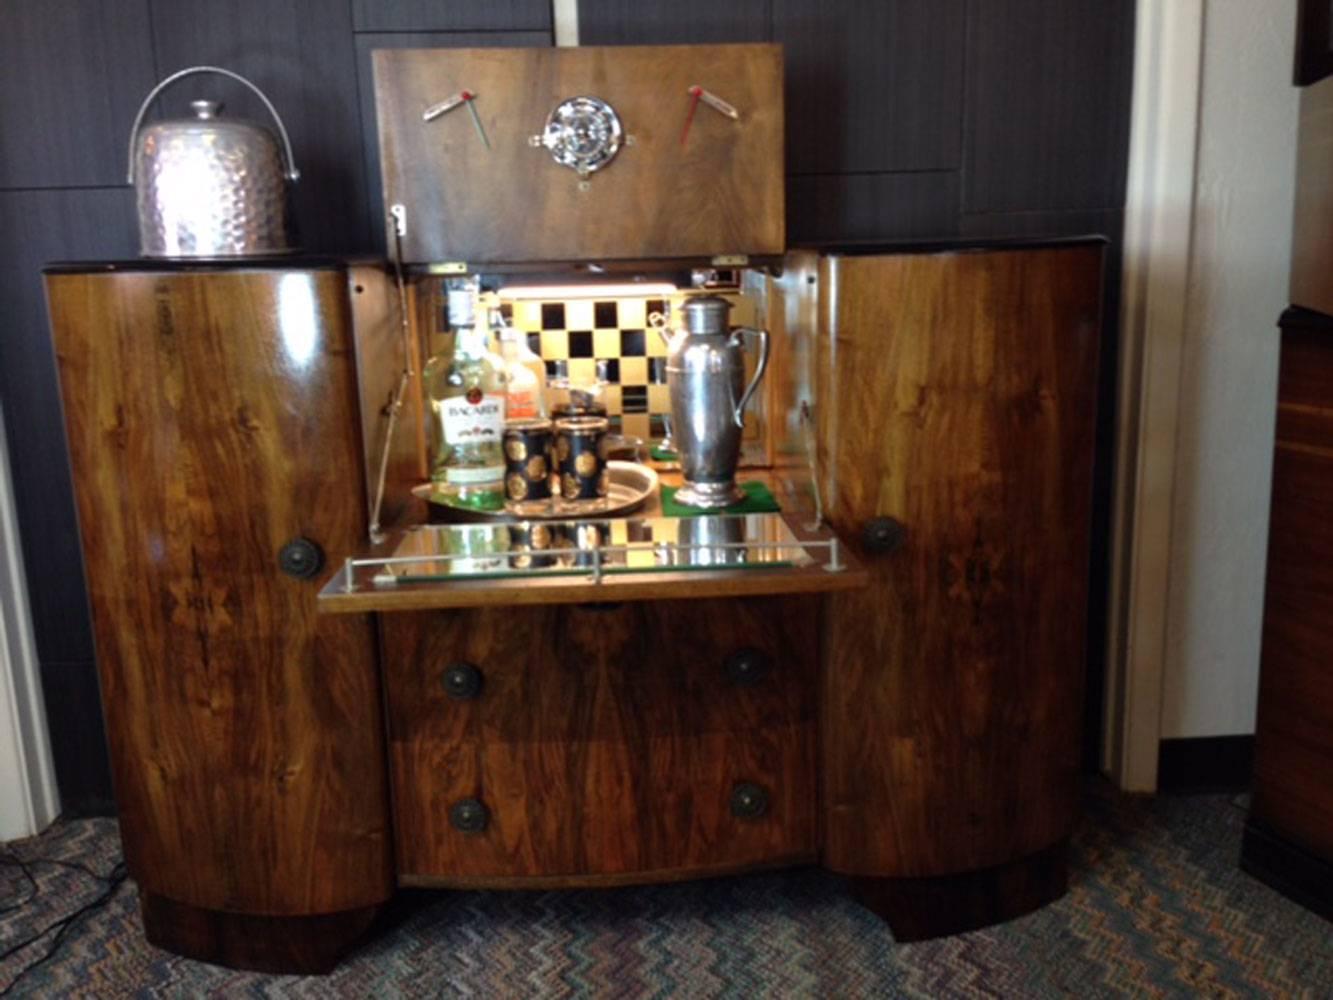 Fully restored Art Deco bar! Also a must for the mid-century modern enthusiast! Two cabinet’s doors each contain a shelf to store all your favorite spirits. Two pull-out drawers for your extra glassware and other bar accessories. The top folds down